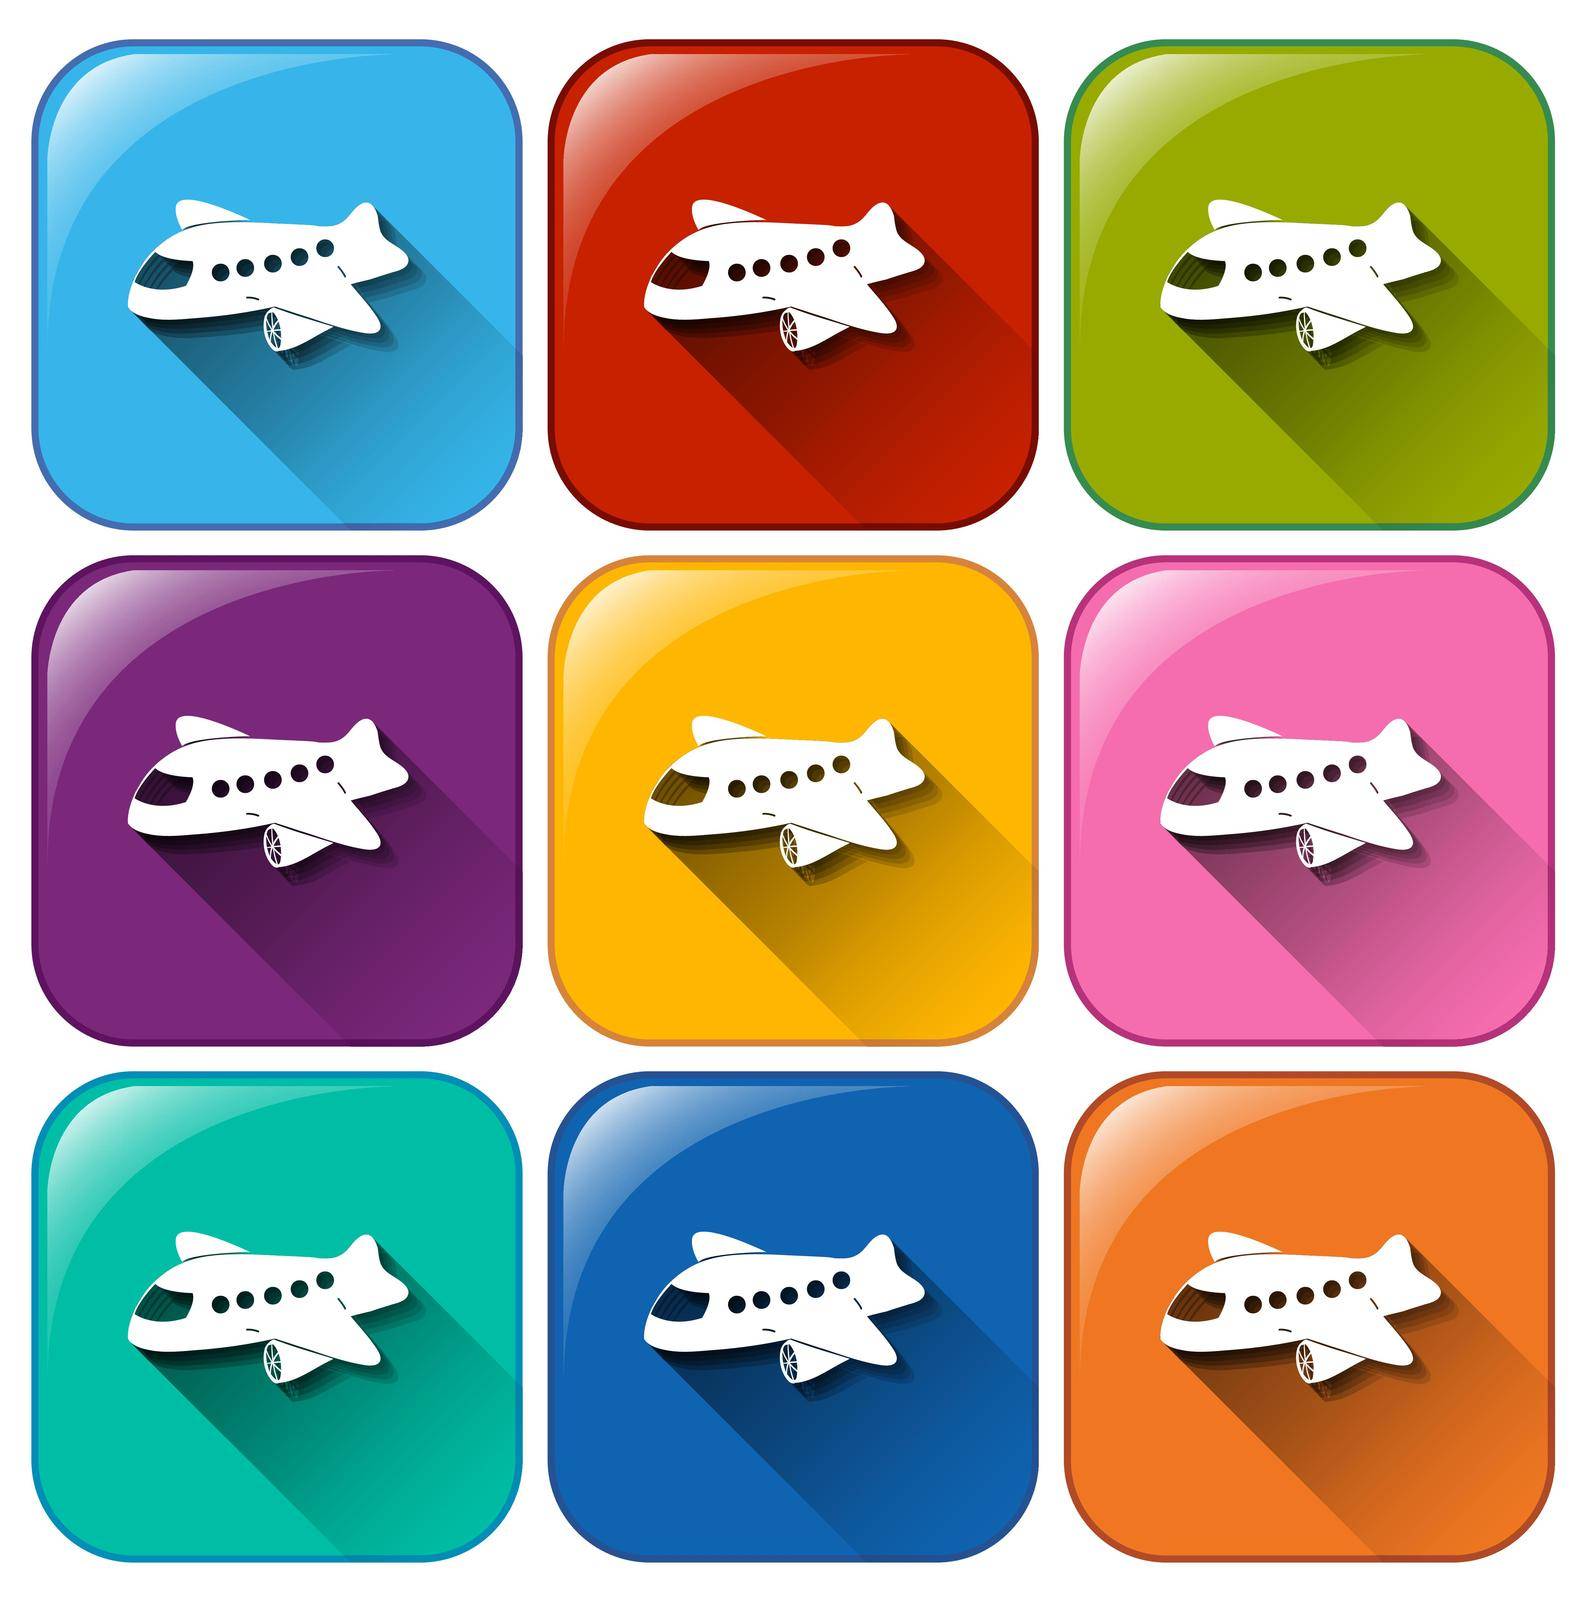 Buttons with planes by iimages